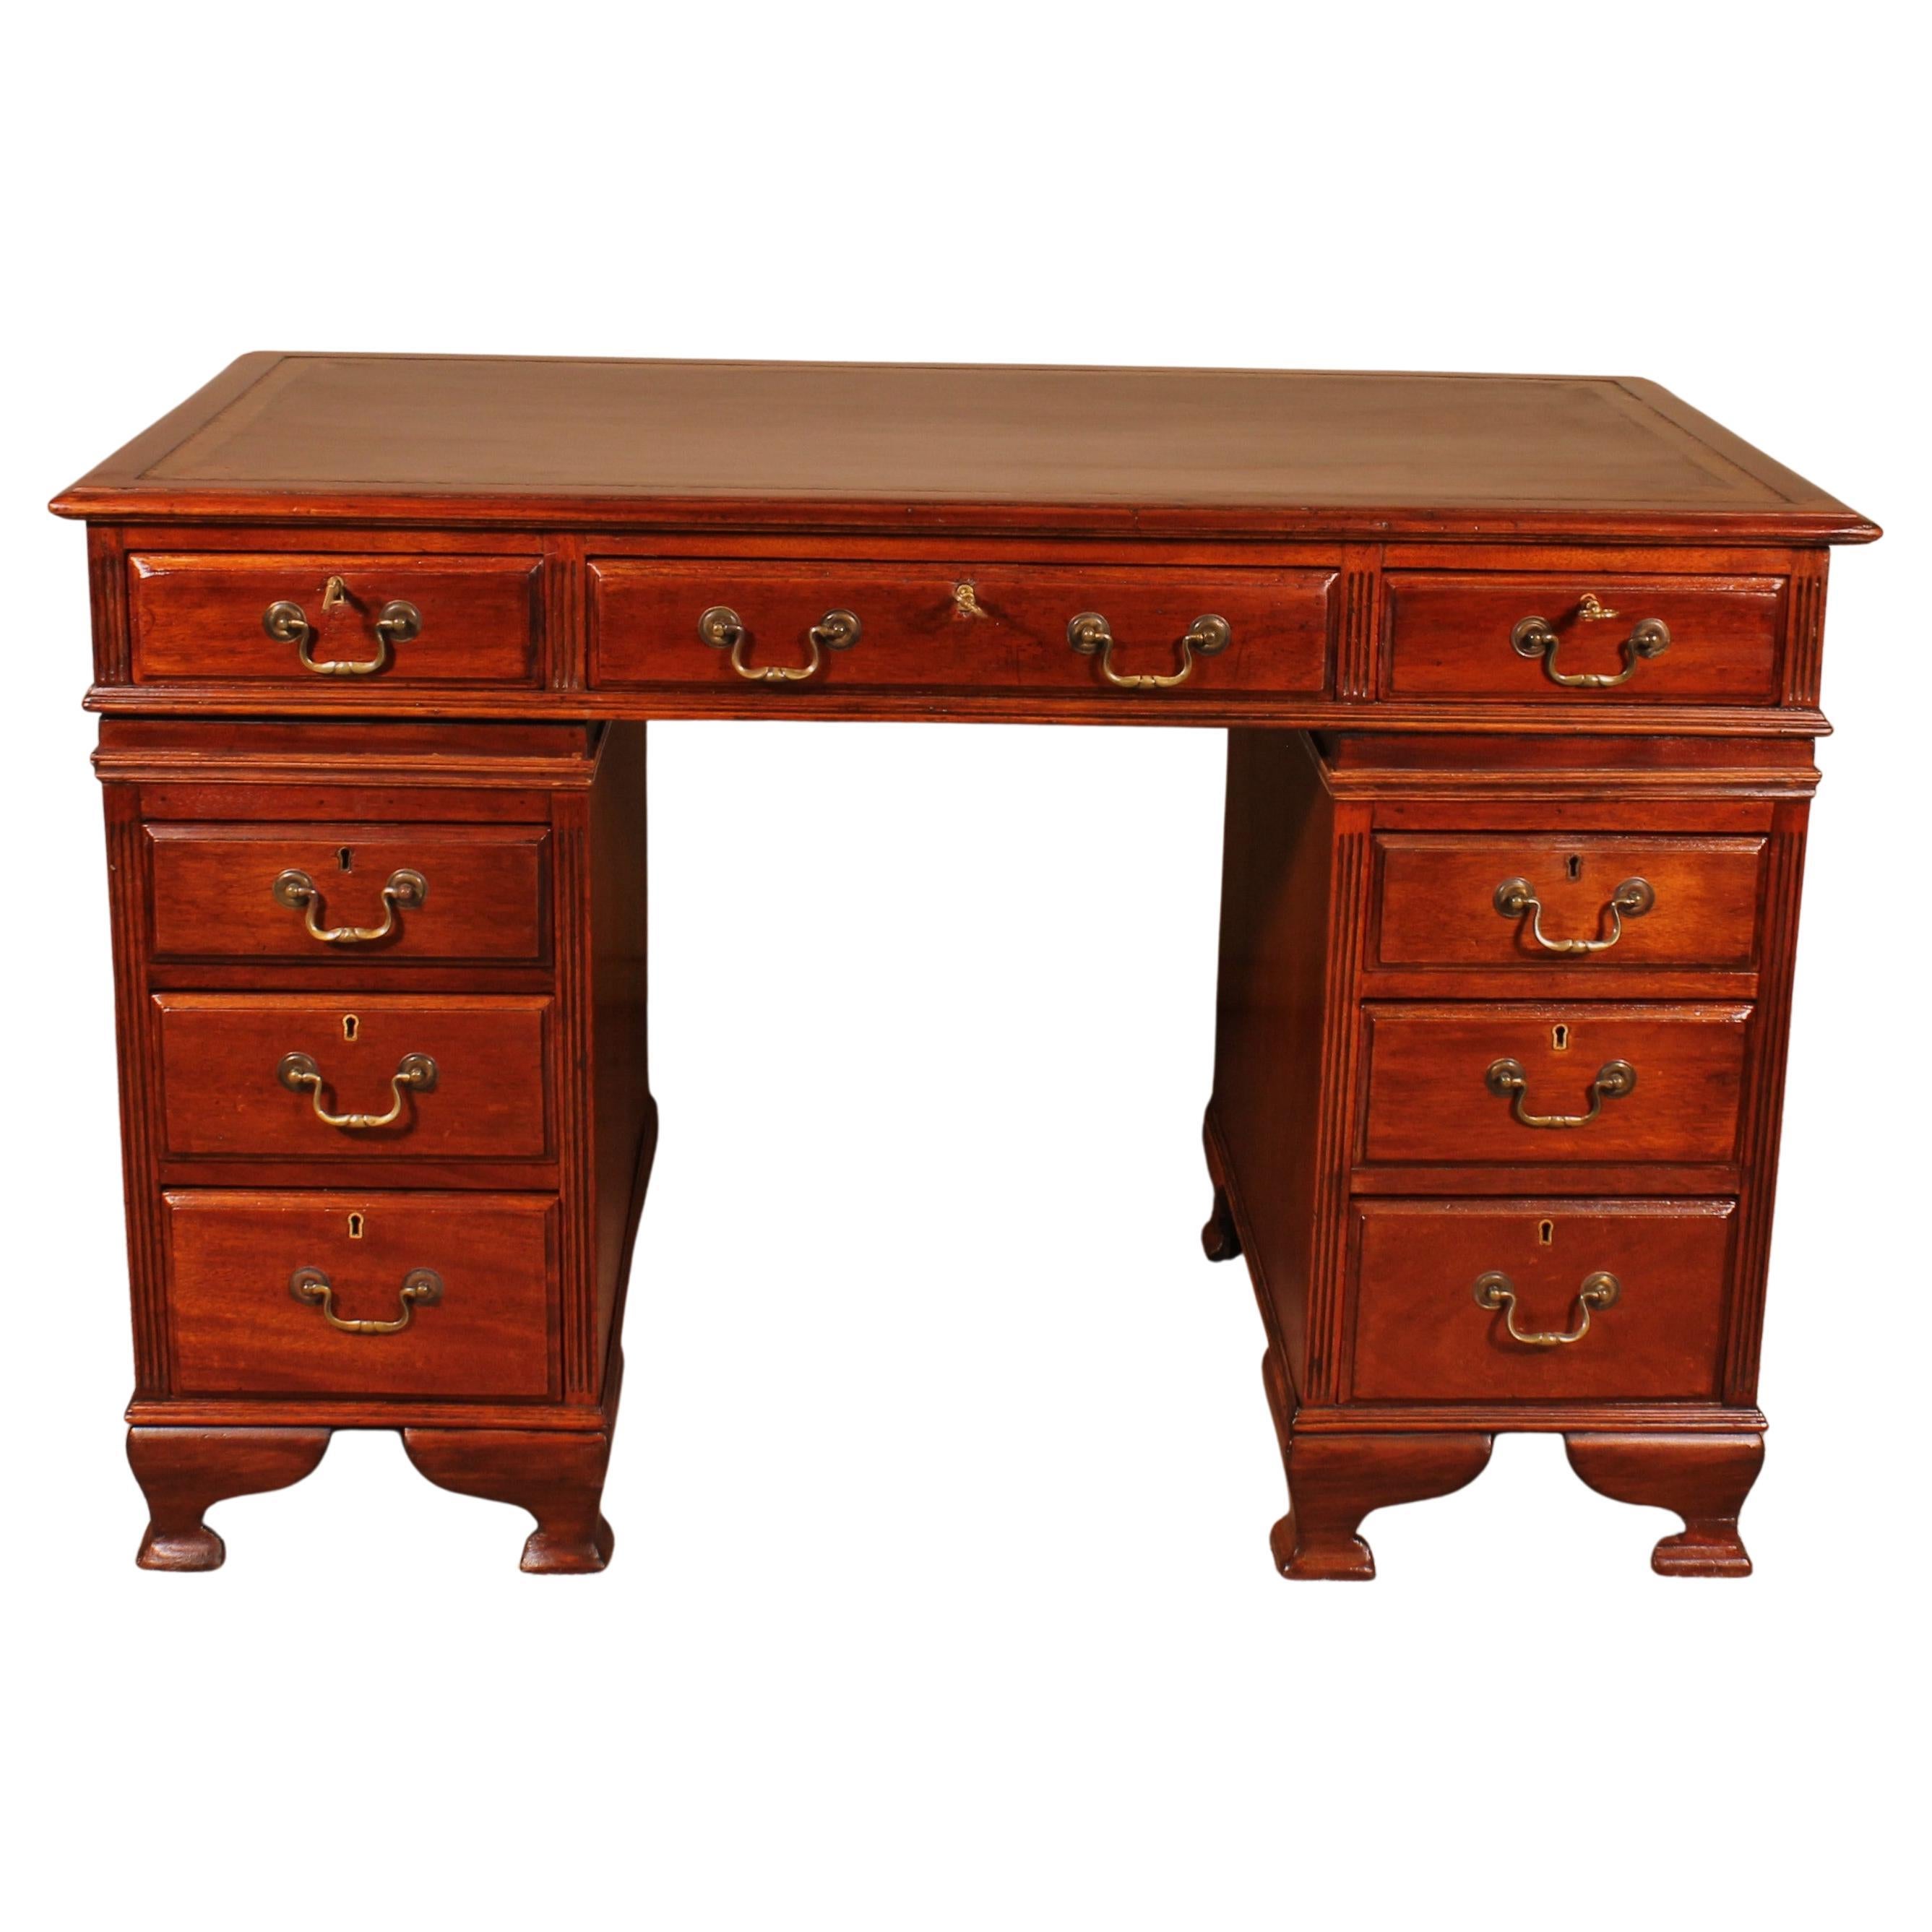 Small Mahogany Pedestal Desk From The 19 ° Century For Sale